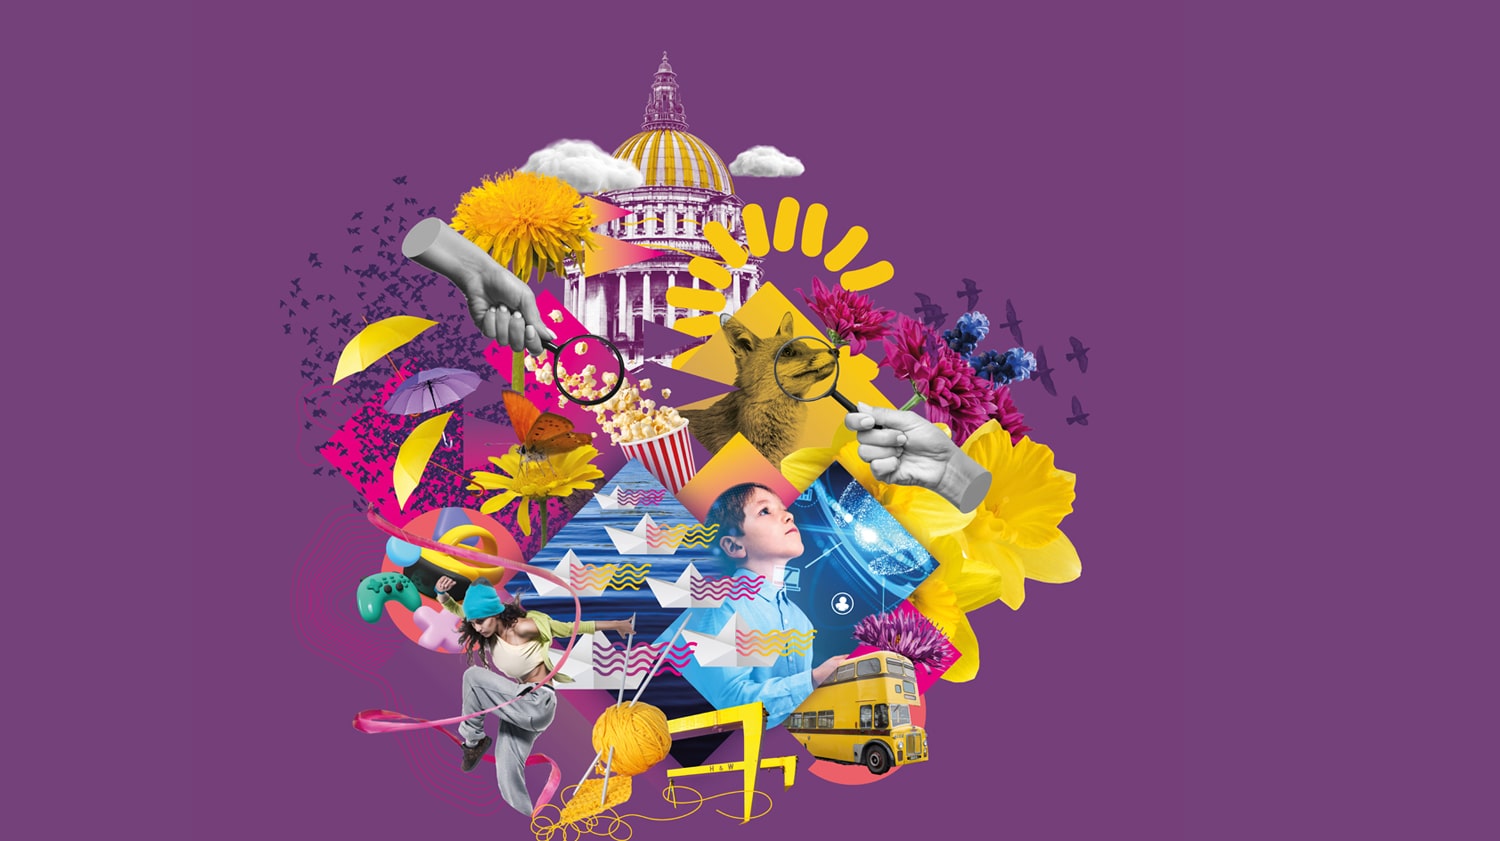 Belfast 2024 programme hero image- collage of various colourful city elements including buildings, citizens, flowers, shapes, etc. on purple background